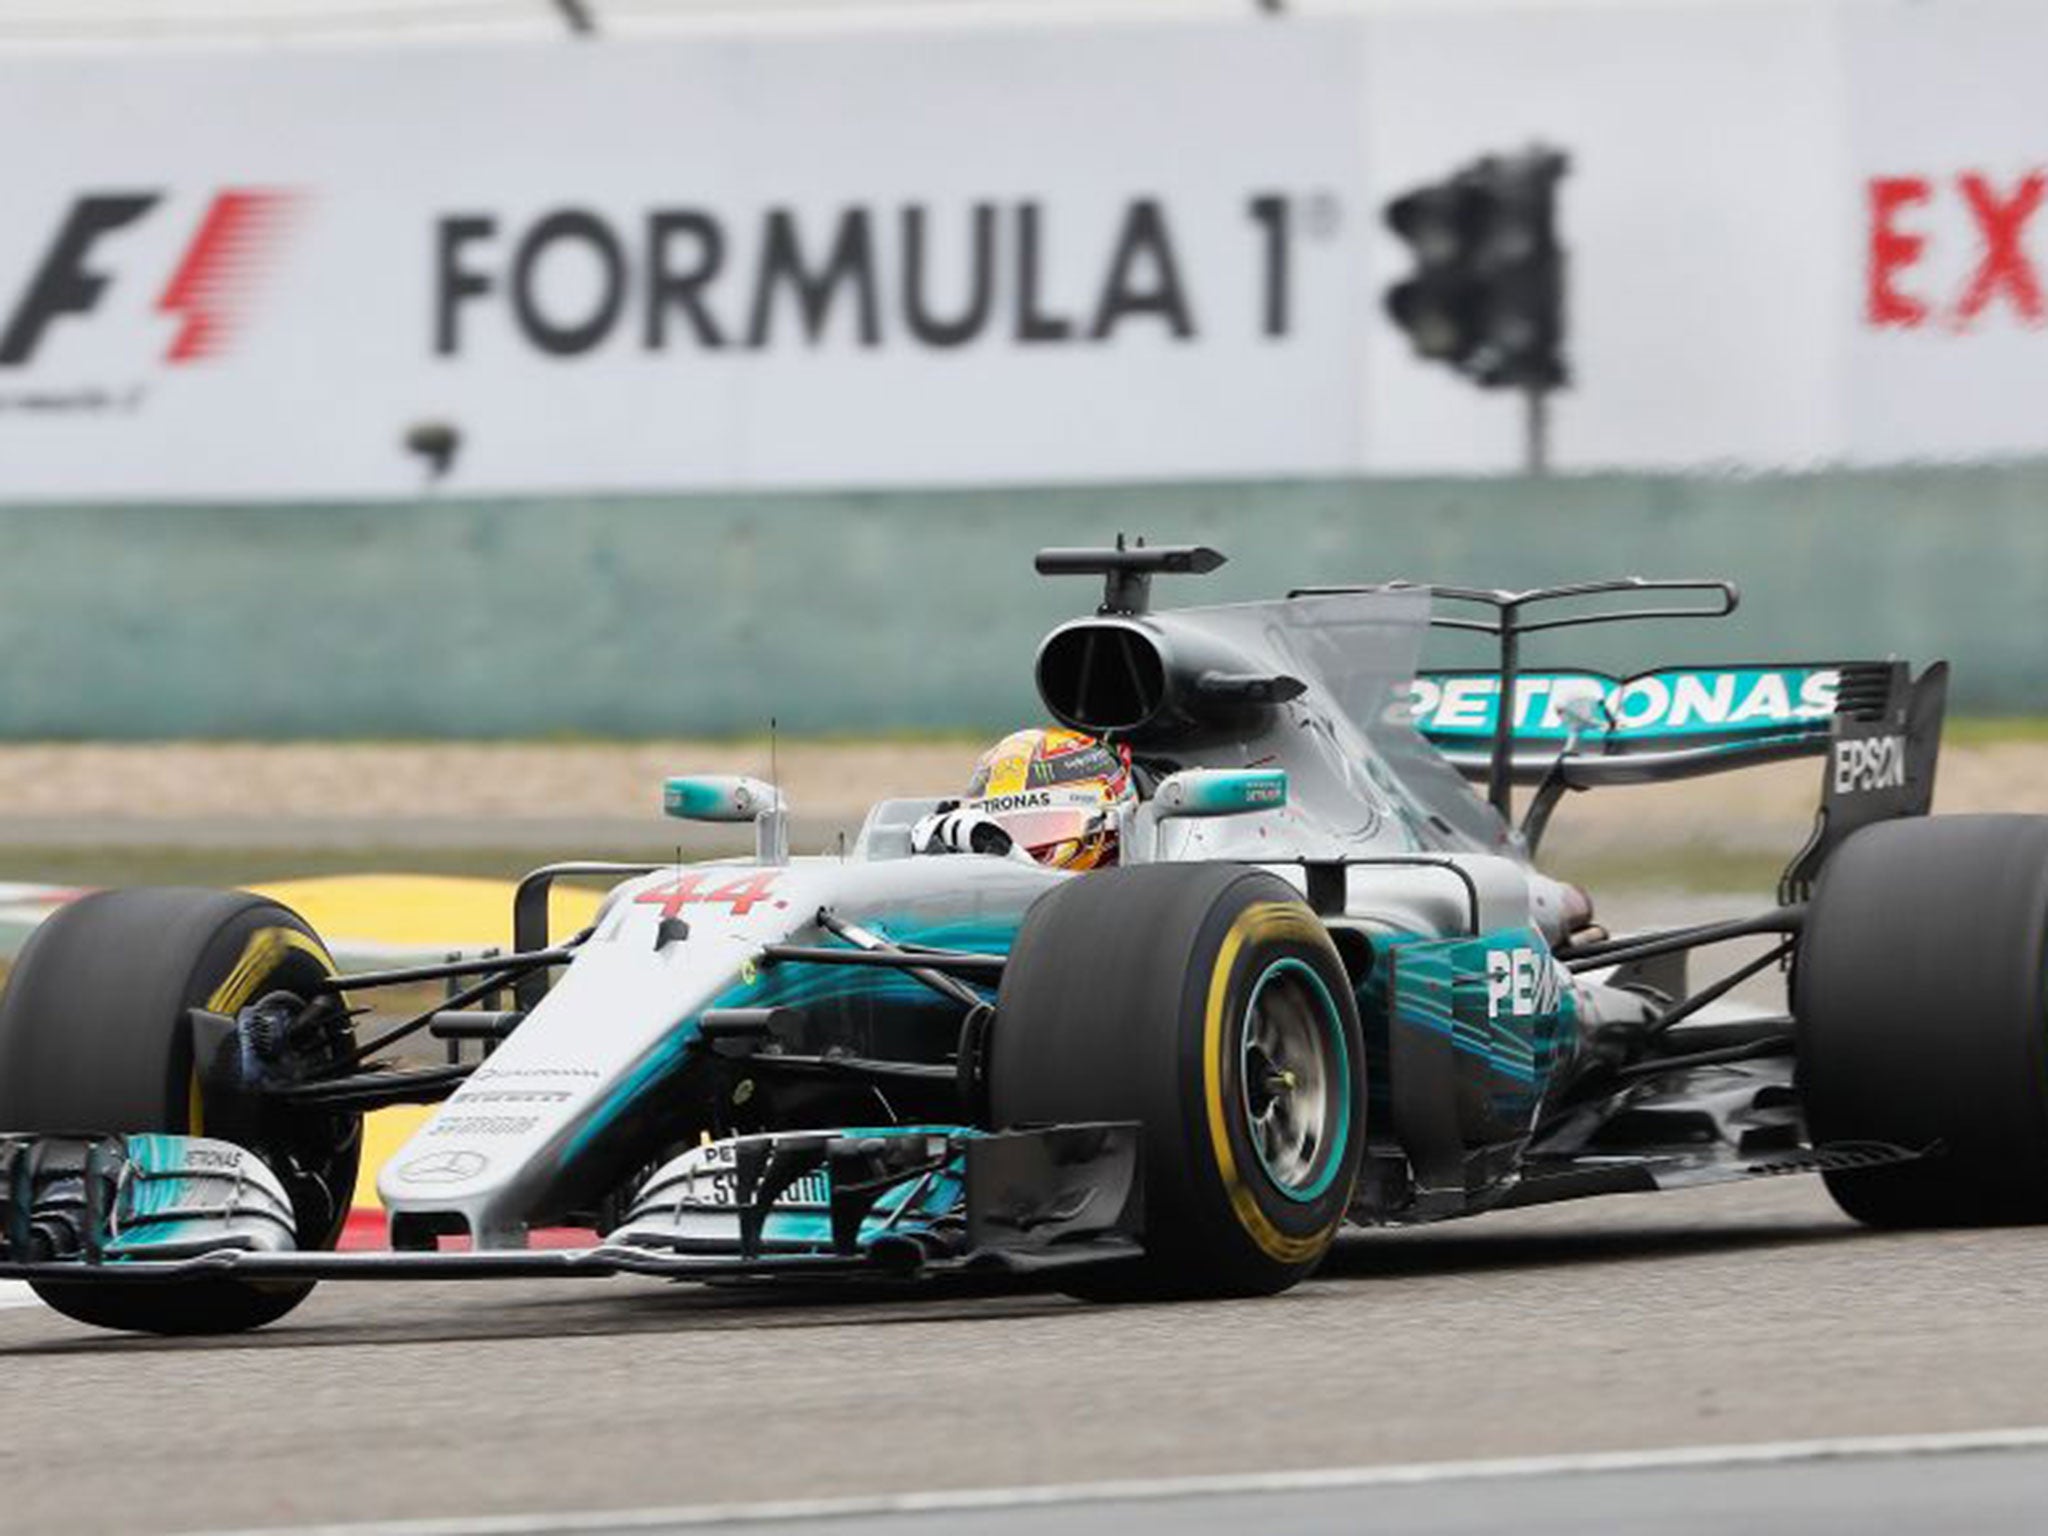 Hamilton controlled the race form the front as he led every lap